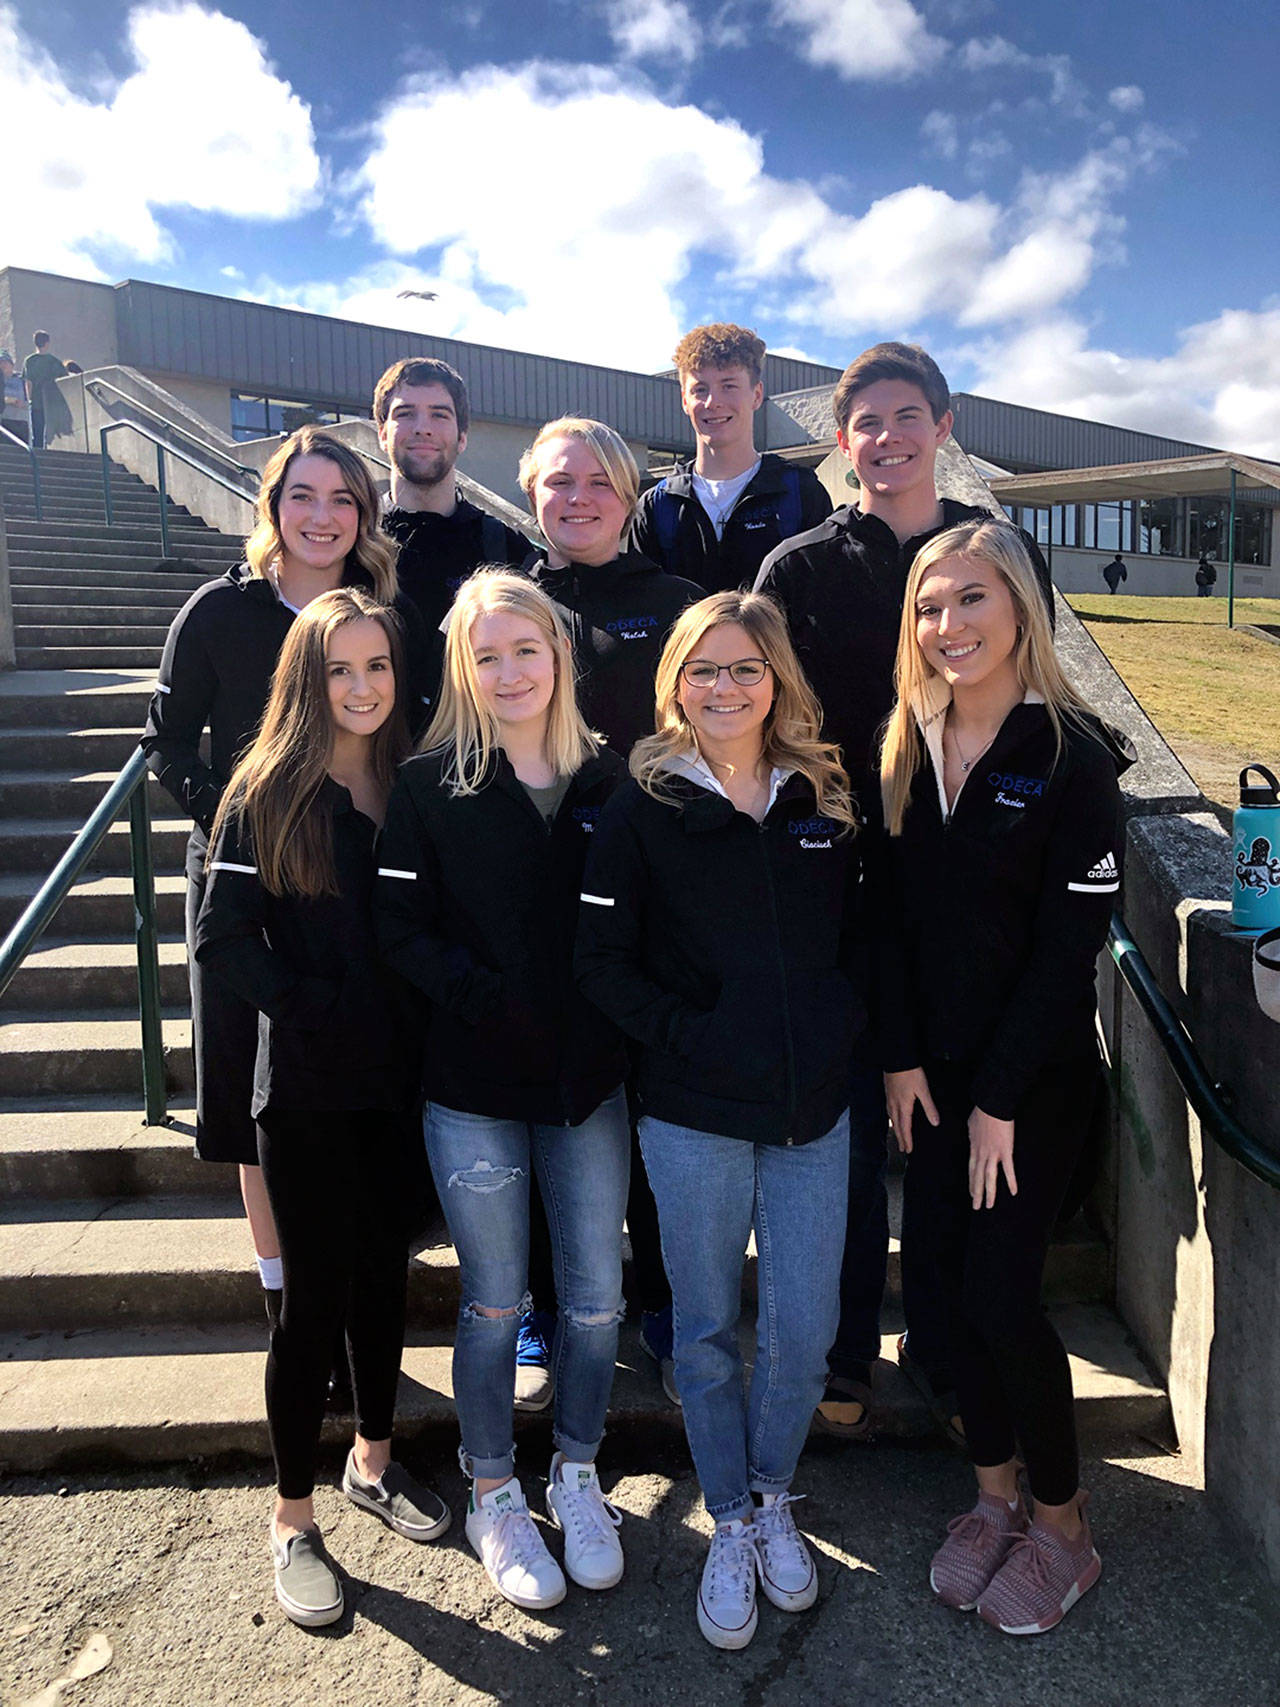 Port Angeles High School DECA students will attend the International Career Development Conference in Orlando, Fla. Pictured, in the front row, from left, are Nacia Bohman, Emma Murray, Josie Ciaciuch and Erin Frazier; the middle row, from left, are Aeverie Politika, Cole Walsh and Skyler Cobb; and, in the back row, from left, Garrett Edwards and Hayden Woods. (Kyle Benedict/Port Angeles High School DECA Club)